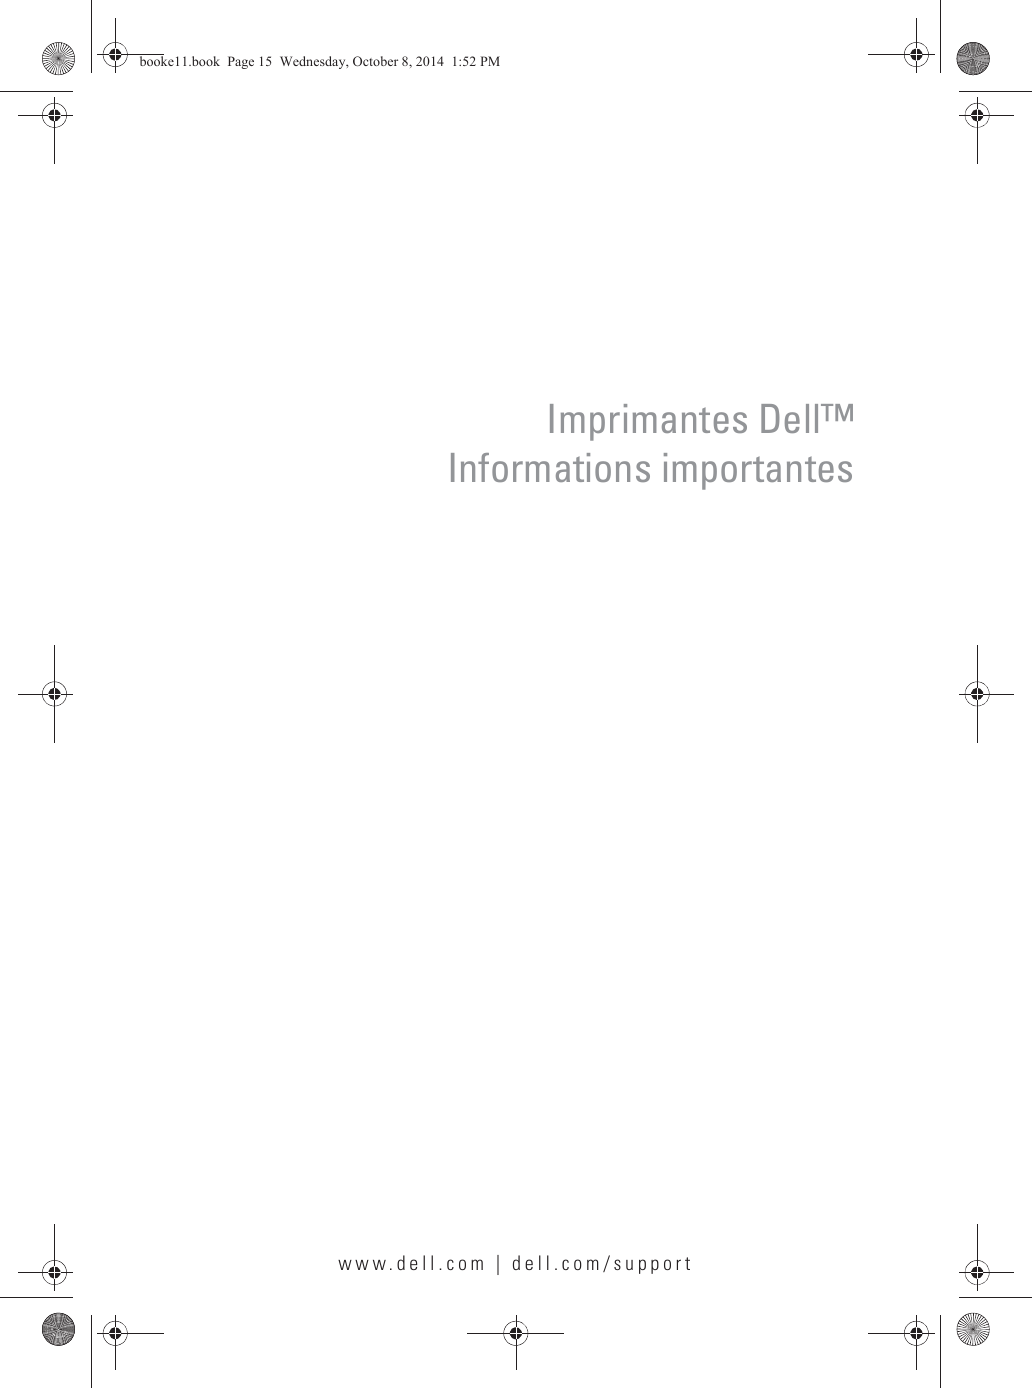 www.dell.com | dell.com/supportImprimantes Dell™Informations importantesbooke11.book  Page 15  Wednesday, October 8, 2014  1:52 PM